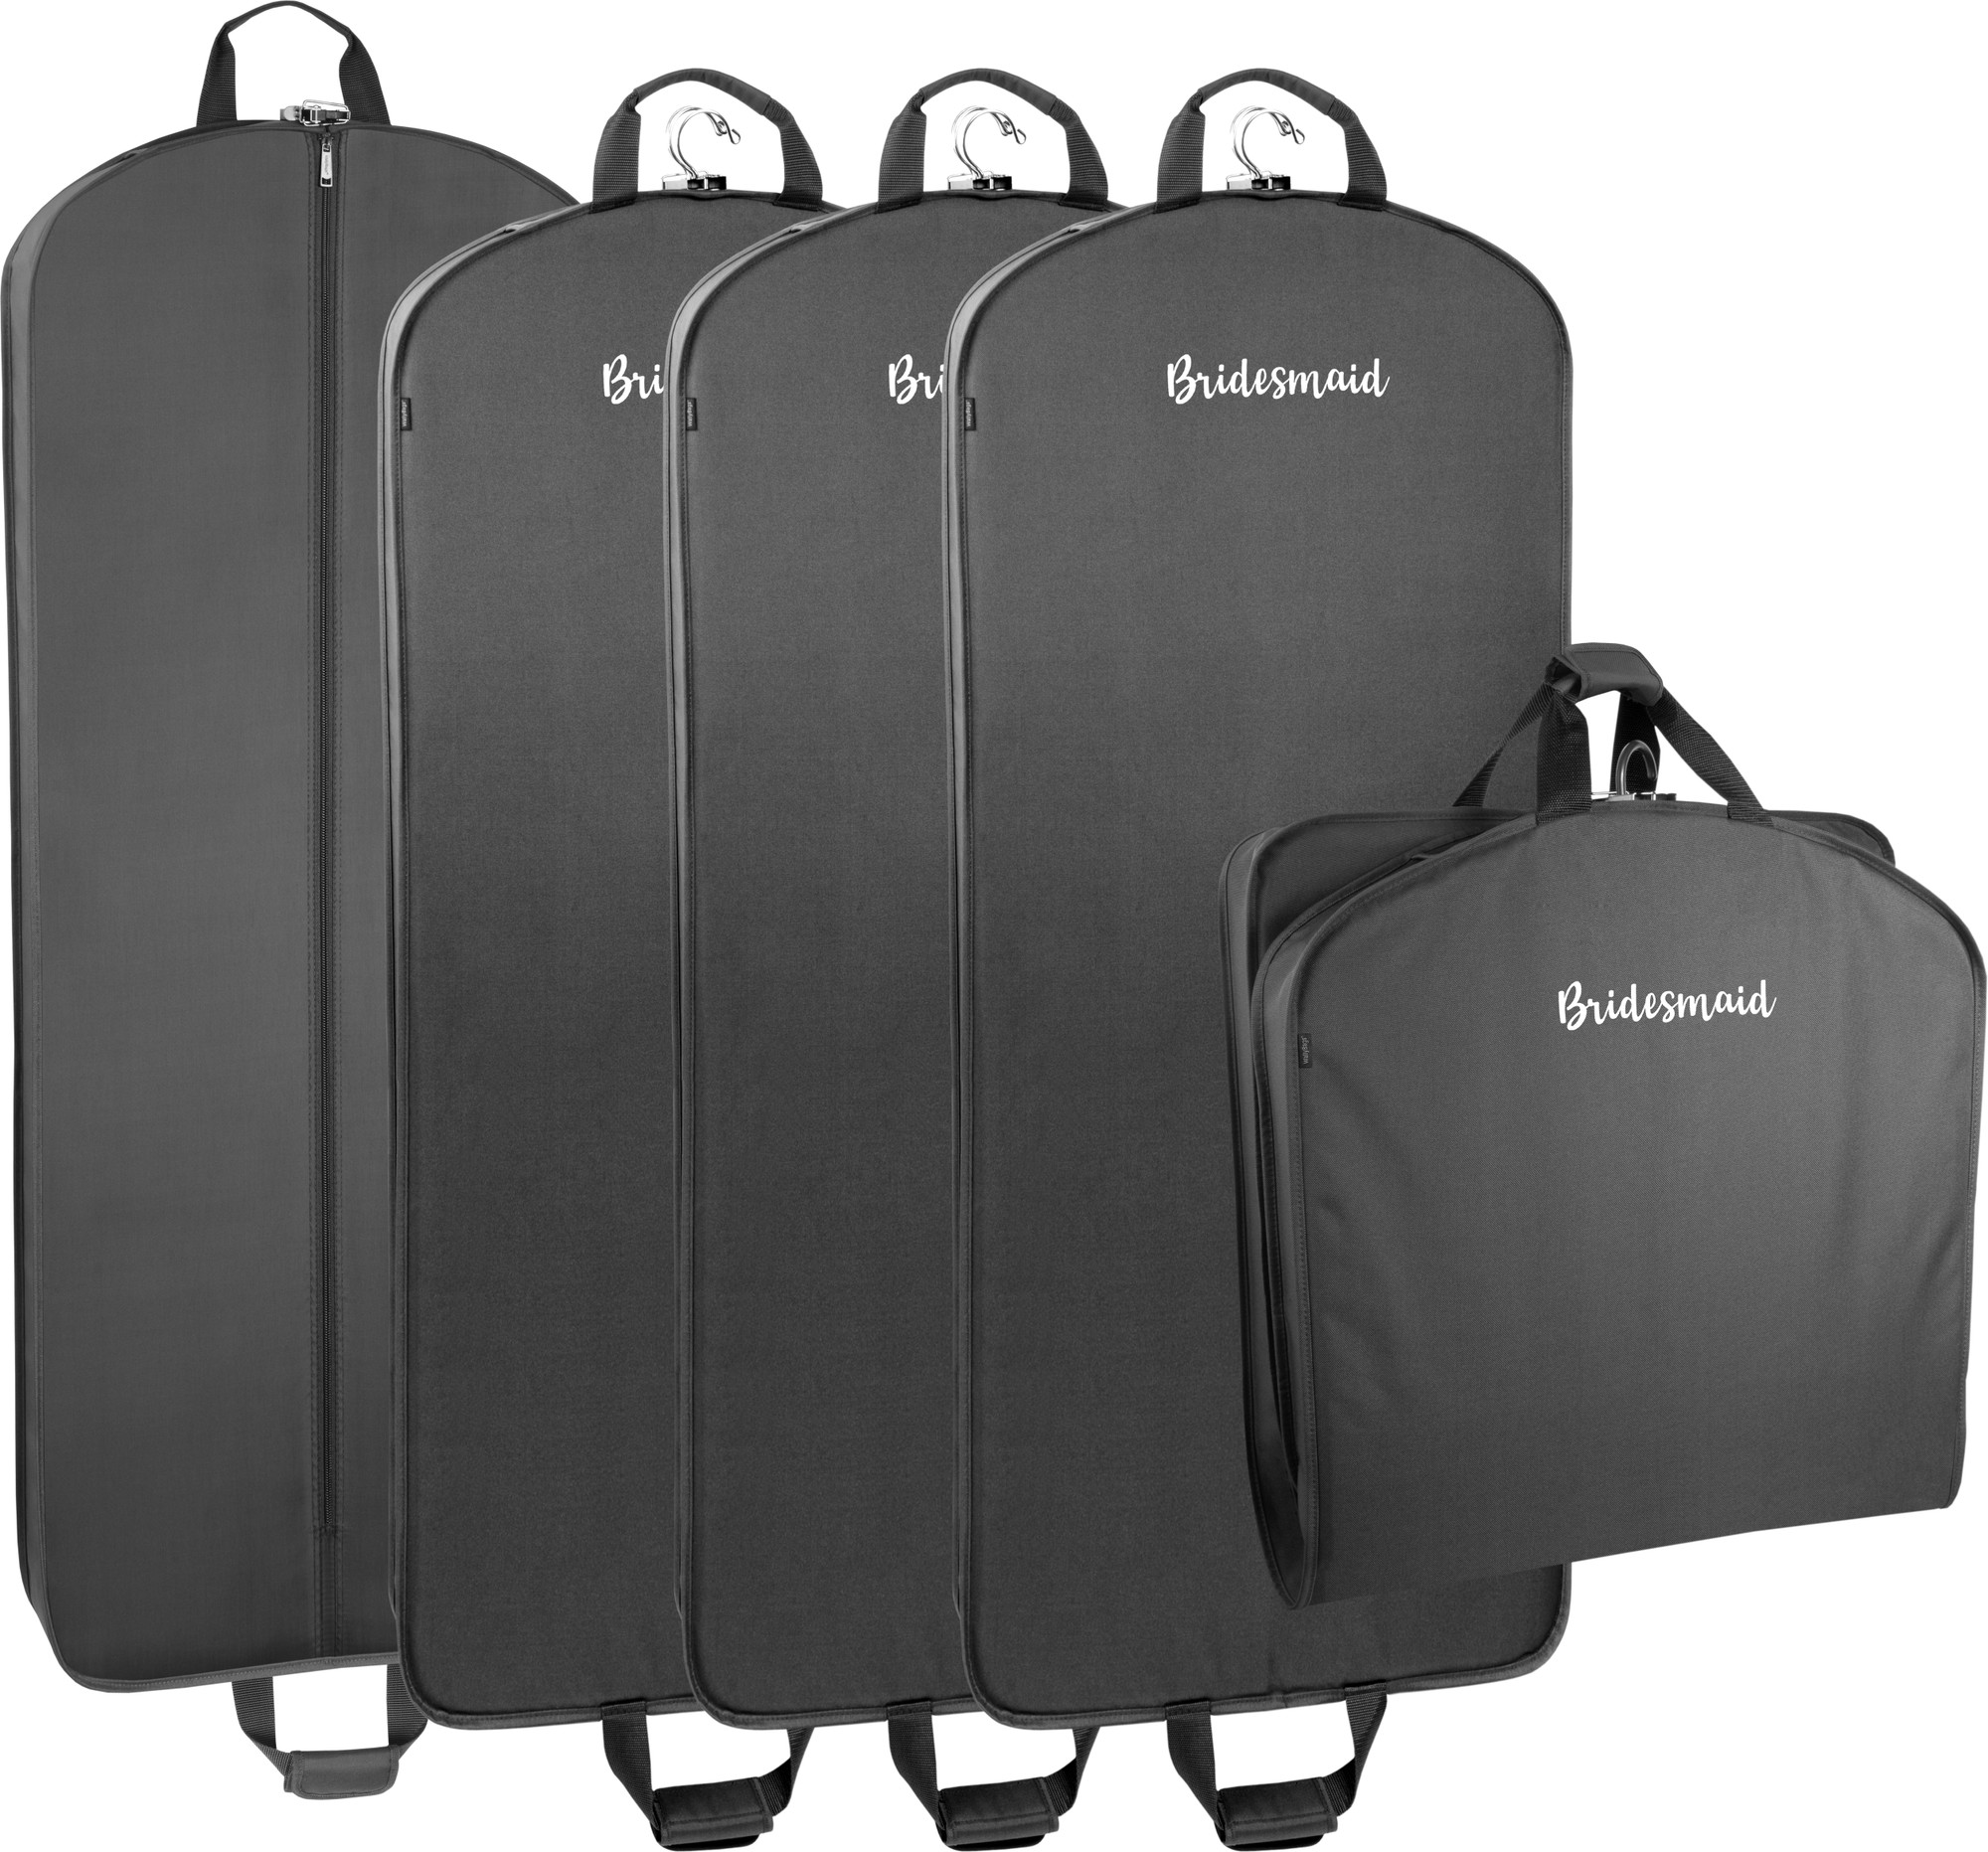 suitcase with garment bag inside